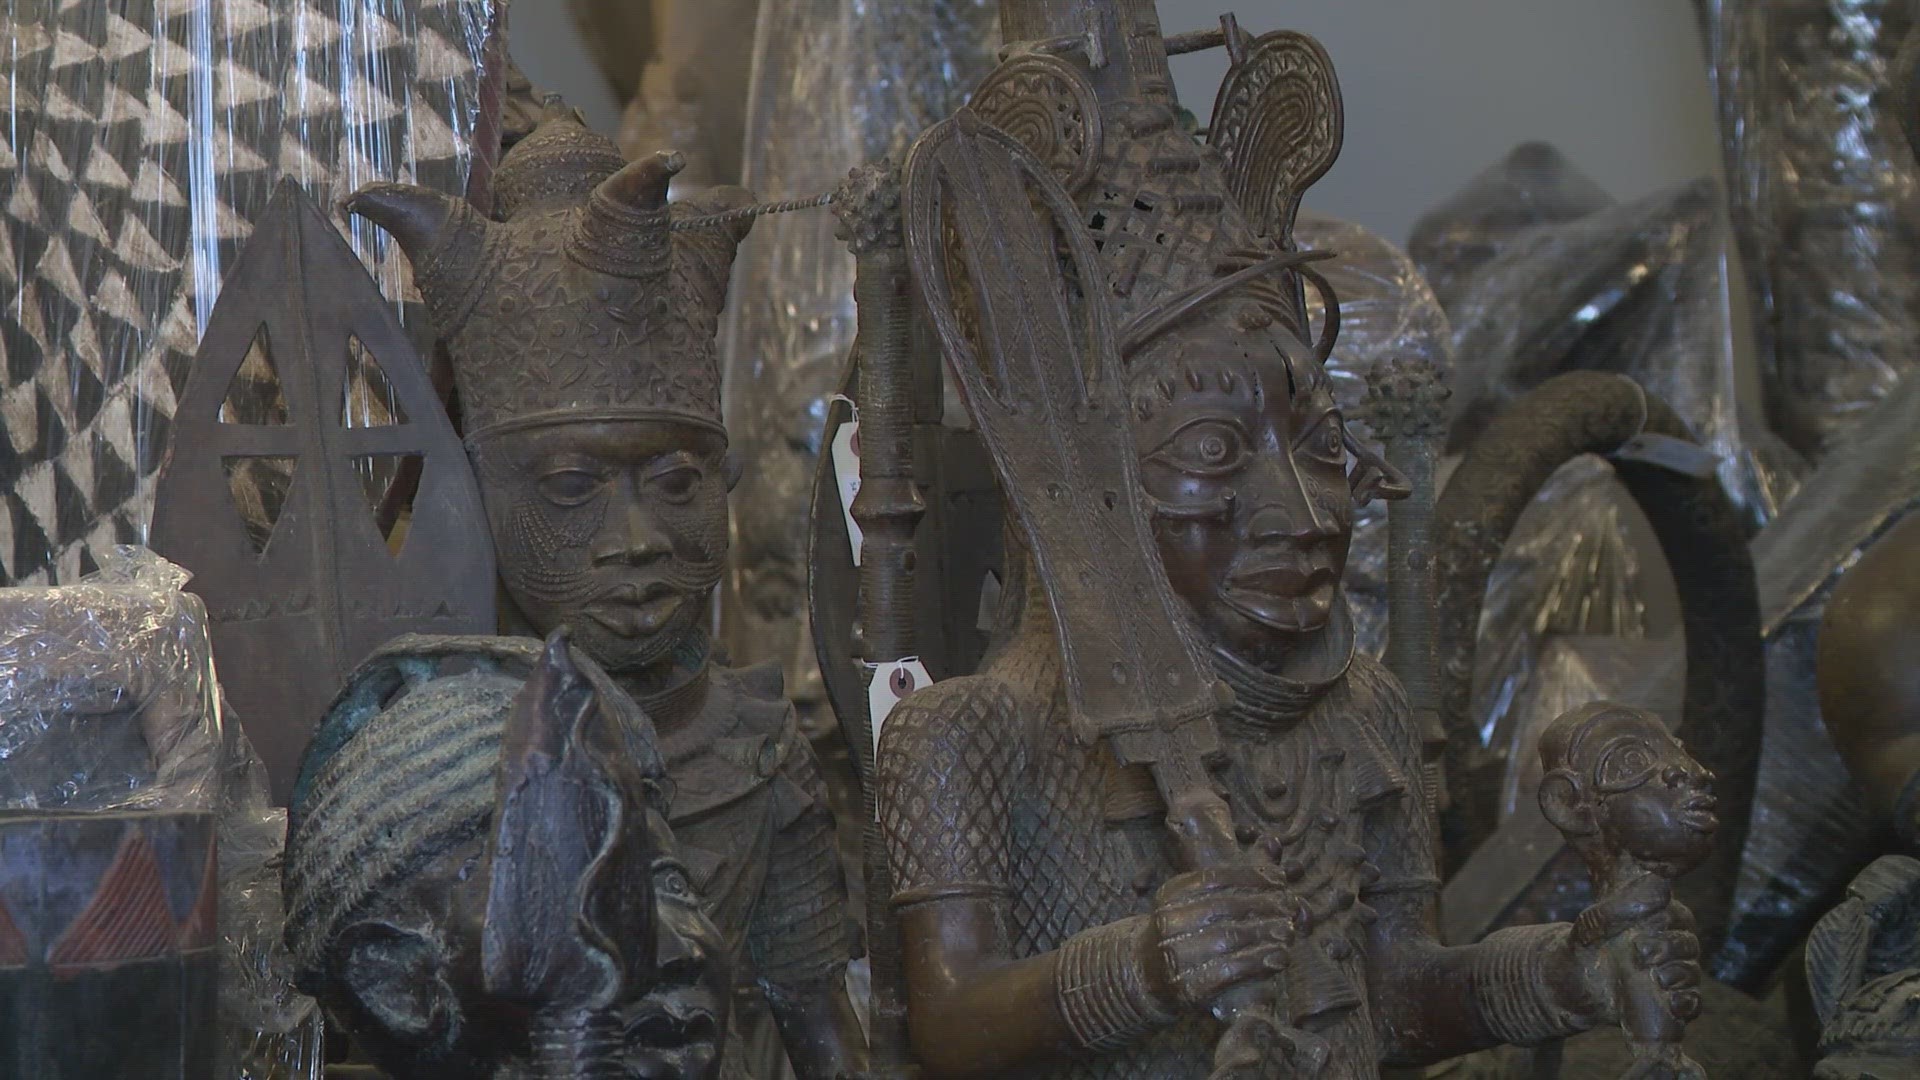 The collection consists of more than 1,000 pieces. For the last two years, it has been housed in two cramped rooms in a building in southwest Houston.